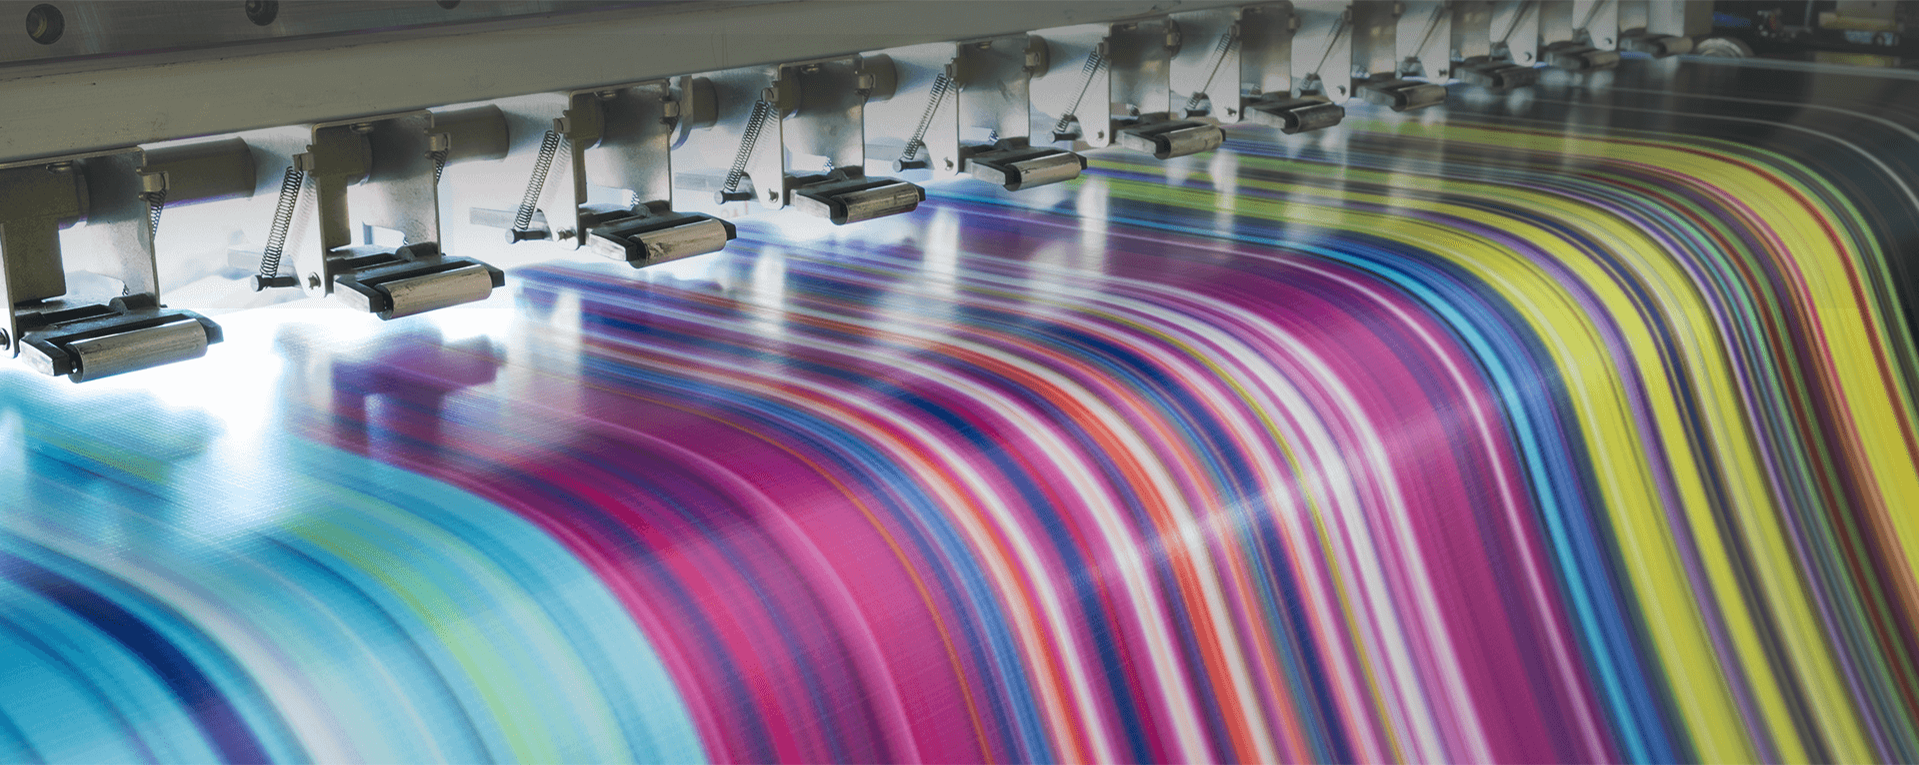 textile chemicals and printing solutions